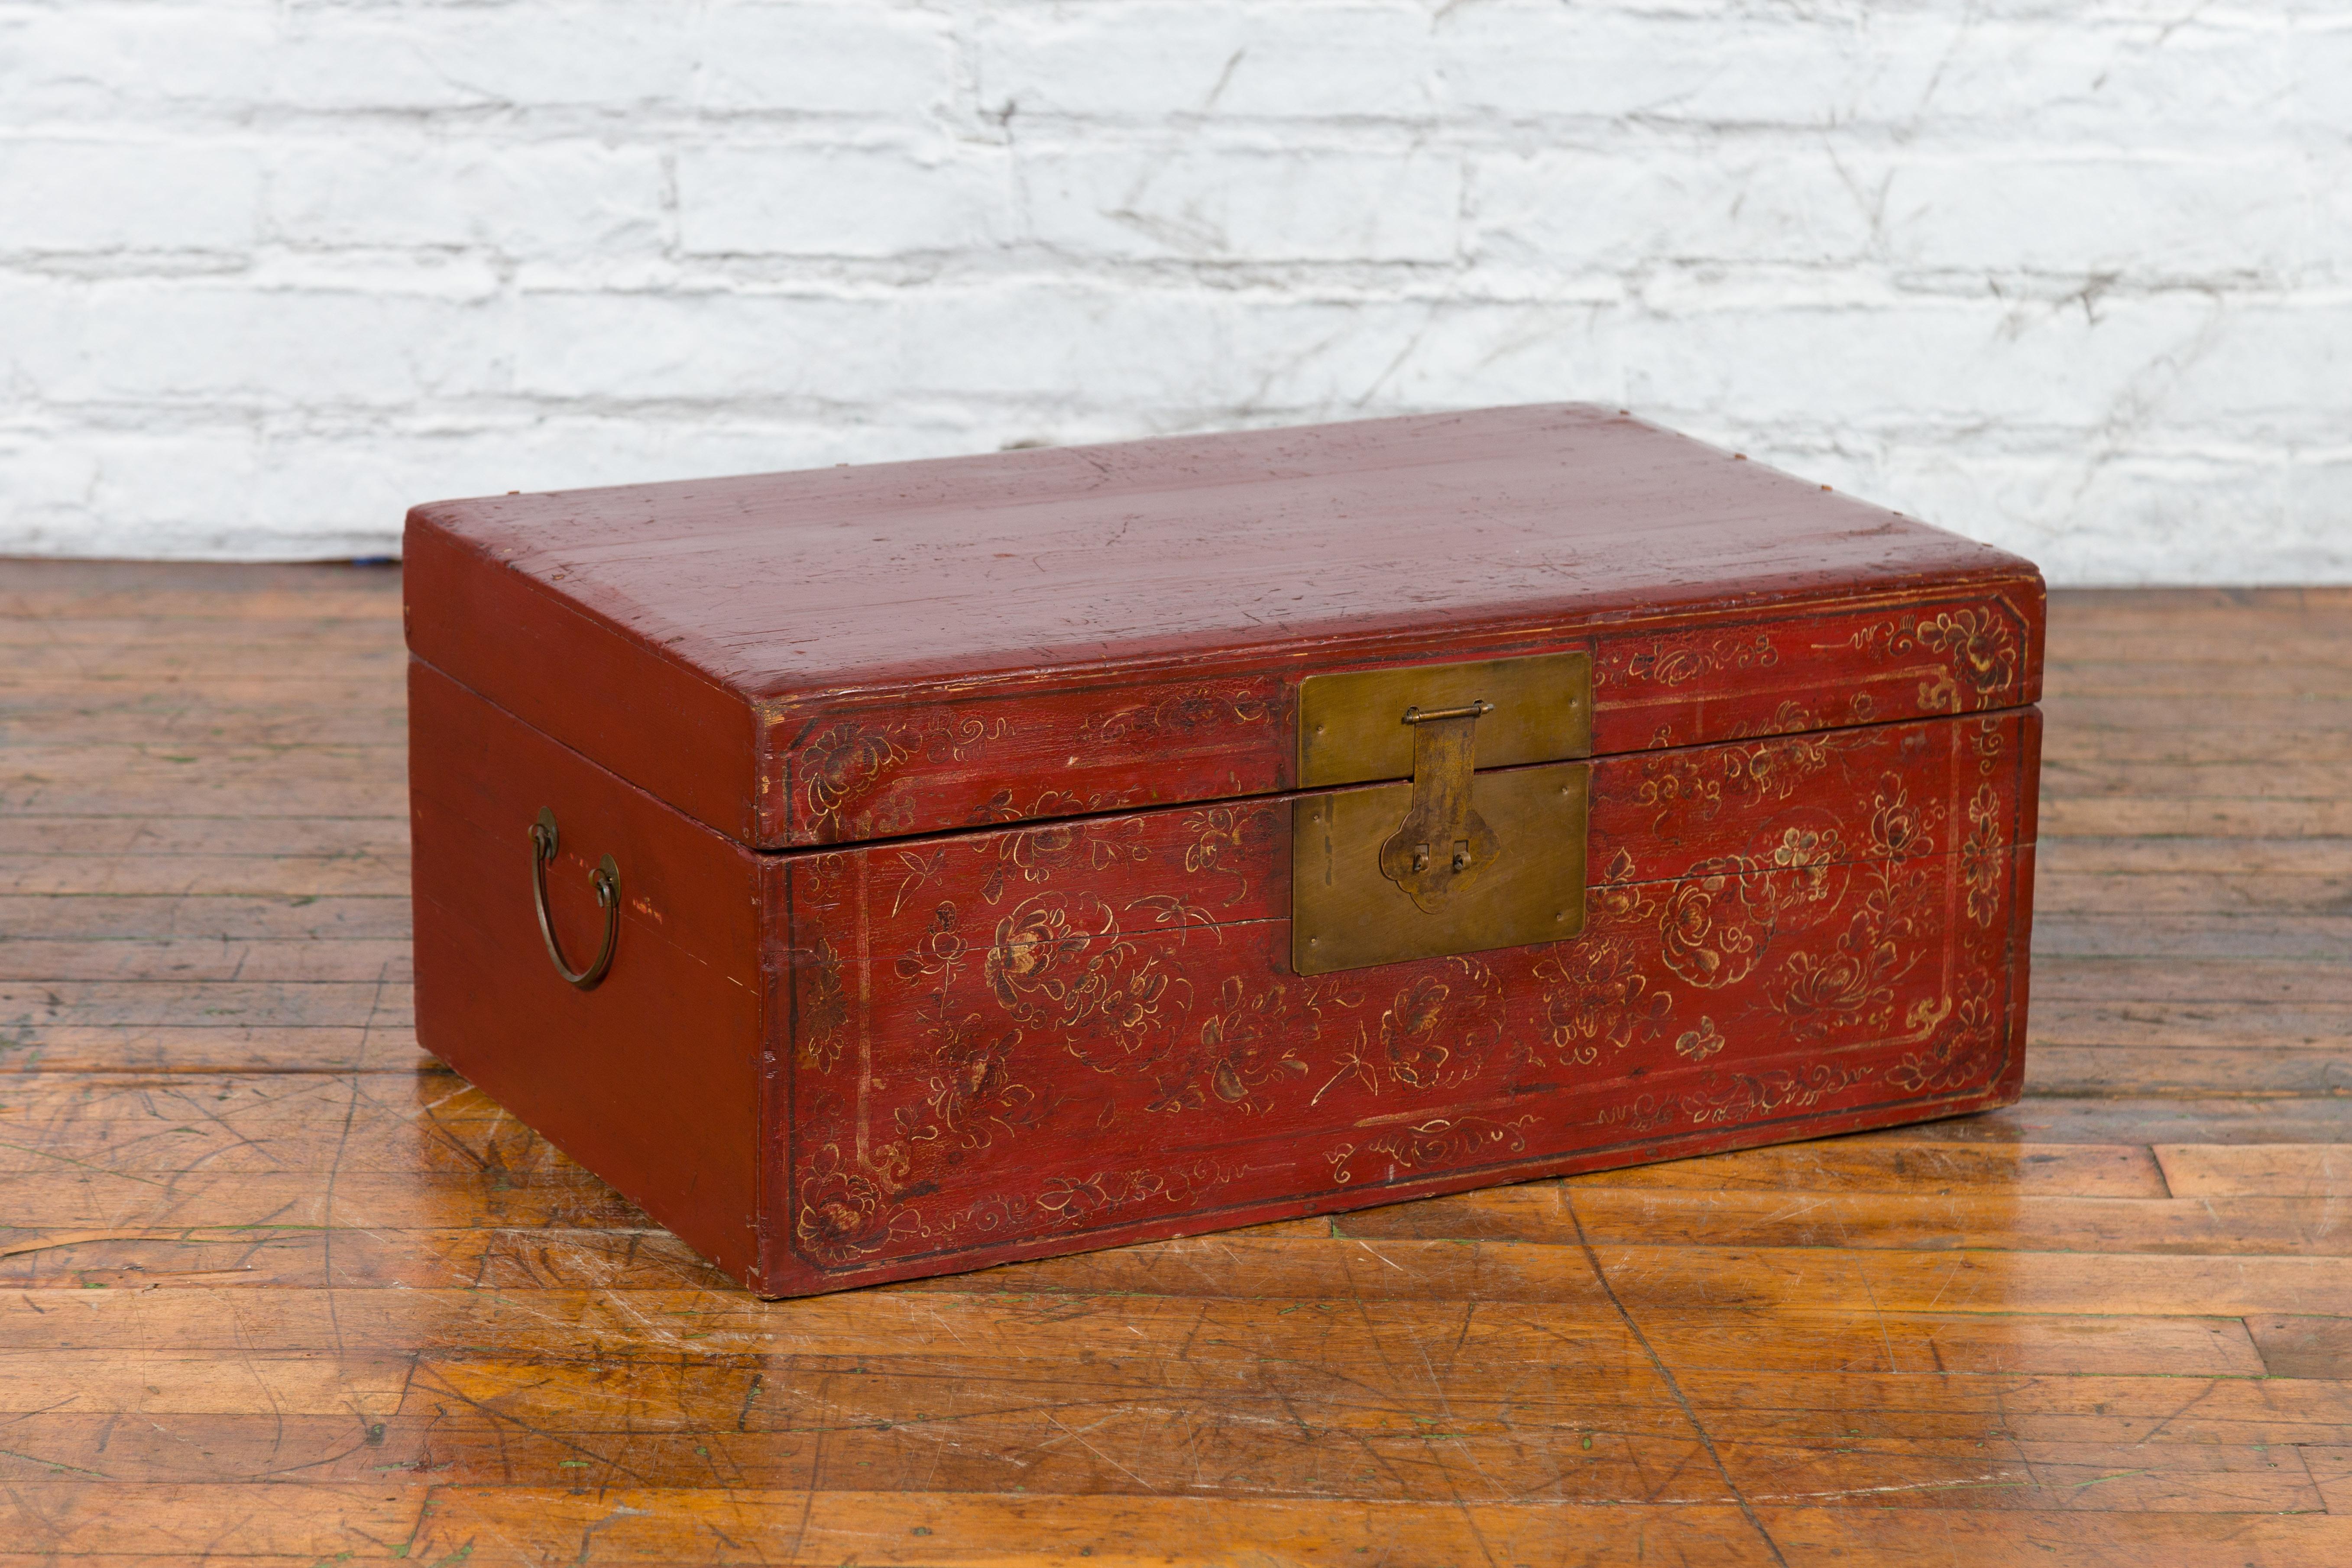 An antique Chinese red lacquered trunk from the early 20th century, with hand-painted floral décor, brass hardware, and natural interior. Created in China during the early years of the 20th century, this trunk features a linear silhouette perfectly